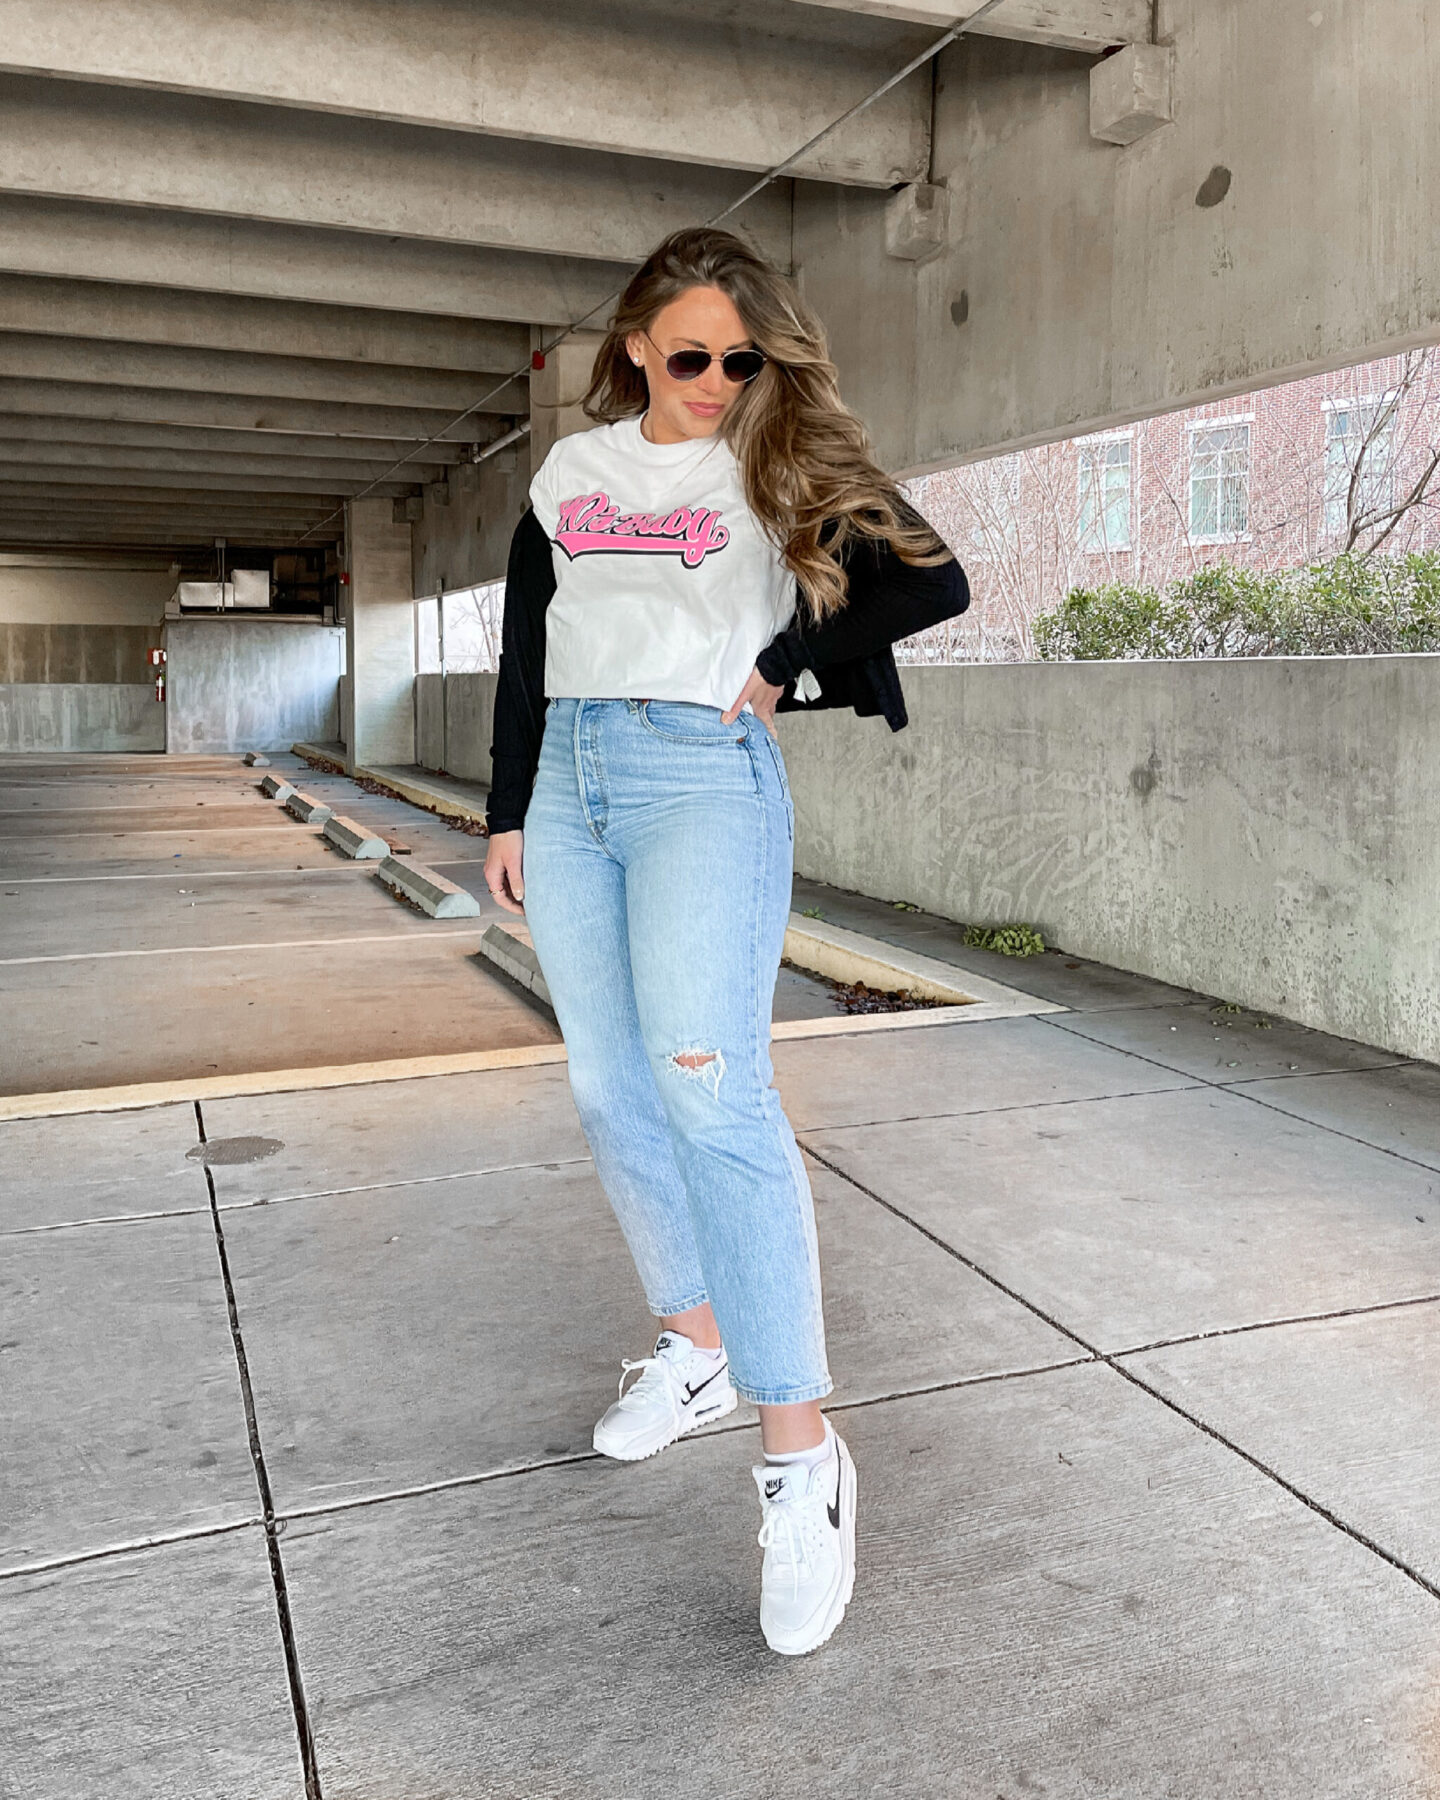 90s baby tee and mom jeans Brittany Ann Courtney